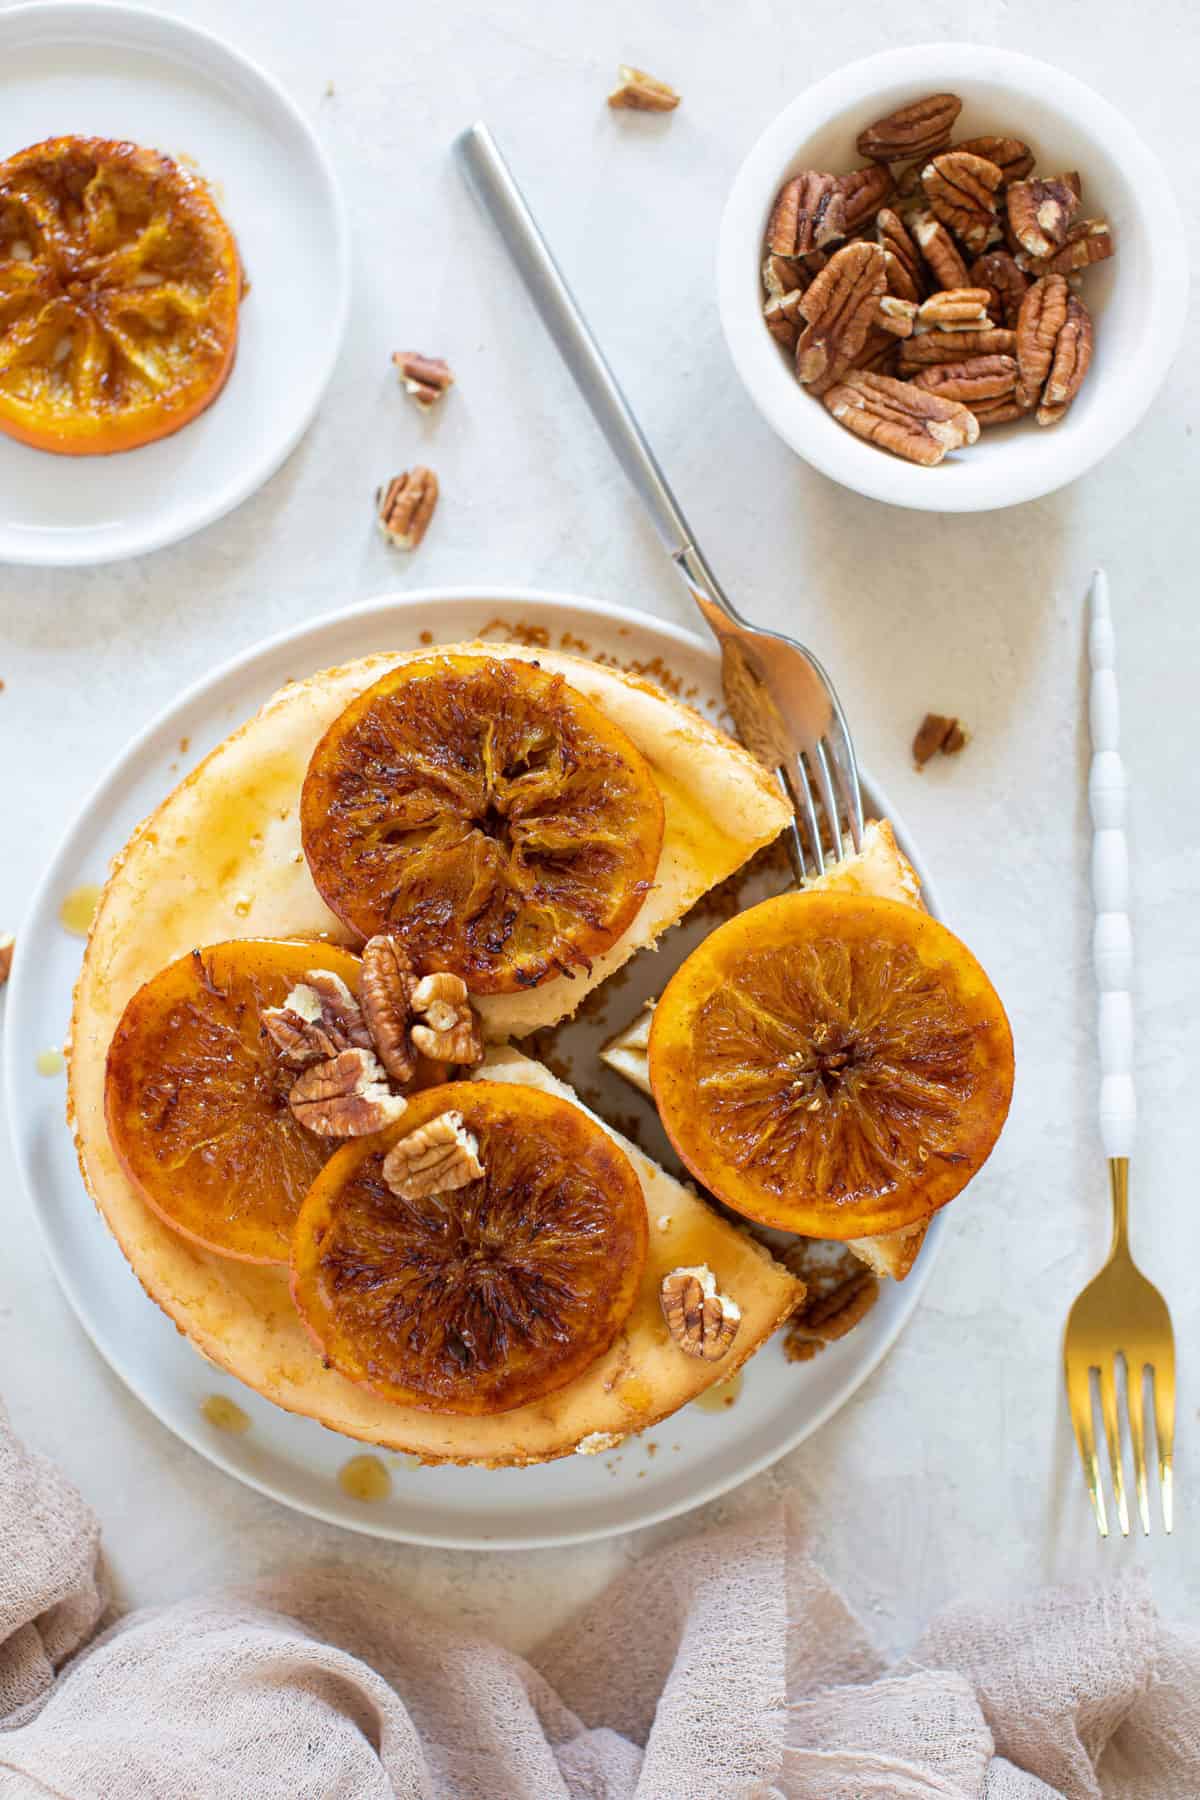 Spiced Orange Cheesecake with Pecan Crust